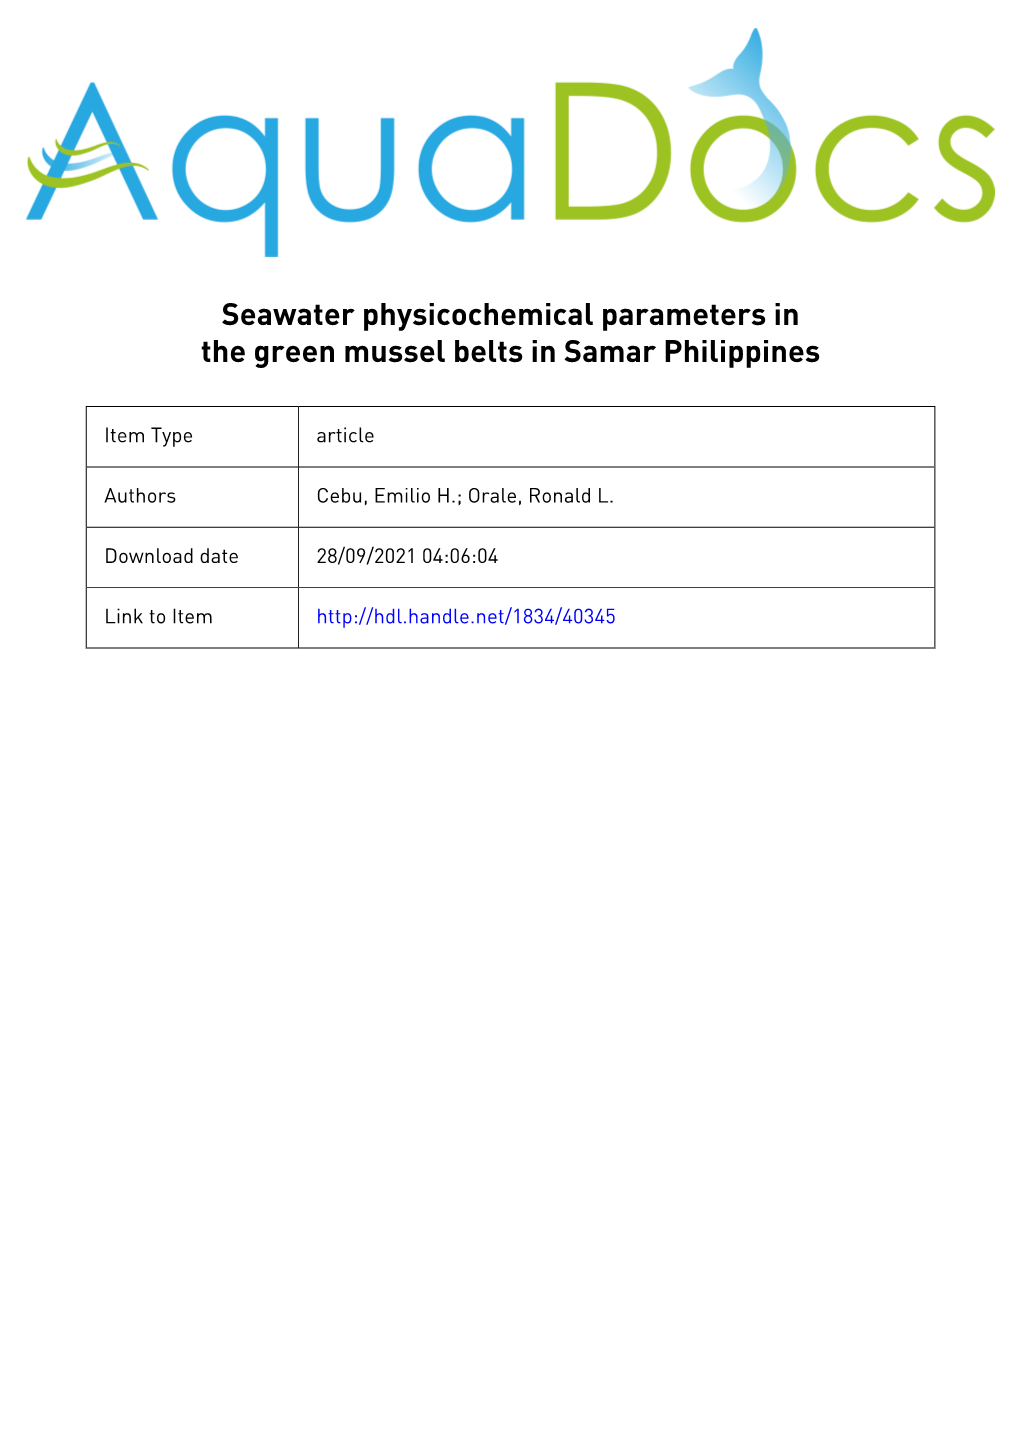 Seawater Physicochemical Parameters in the Green Mussel Belts in Samar Philippines